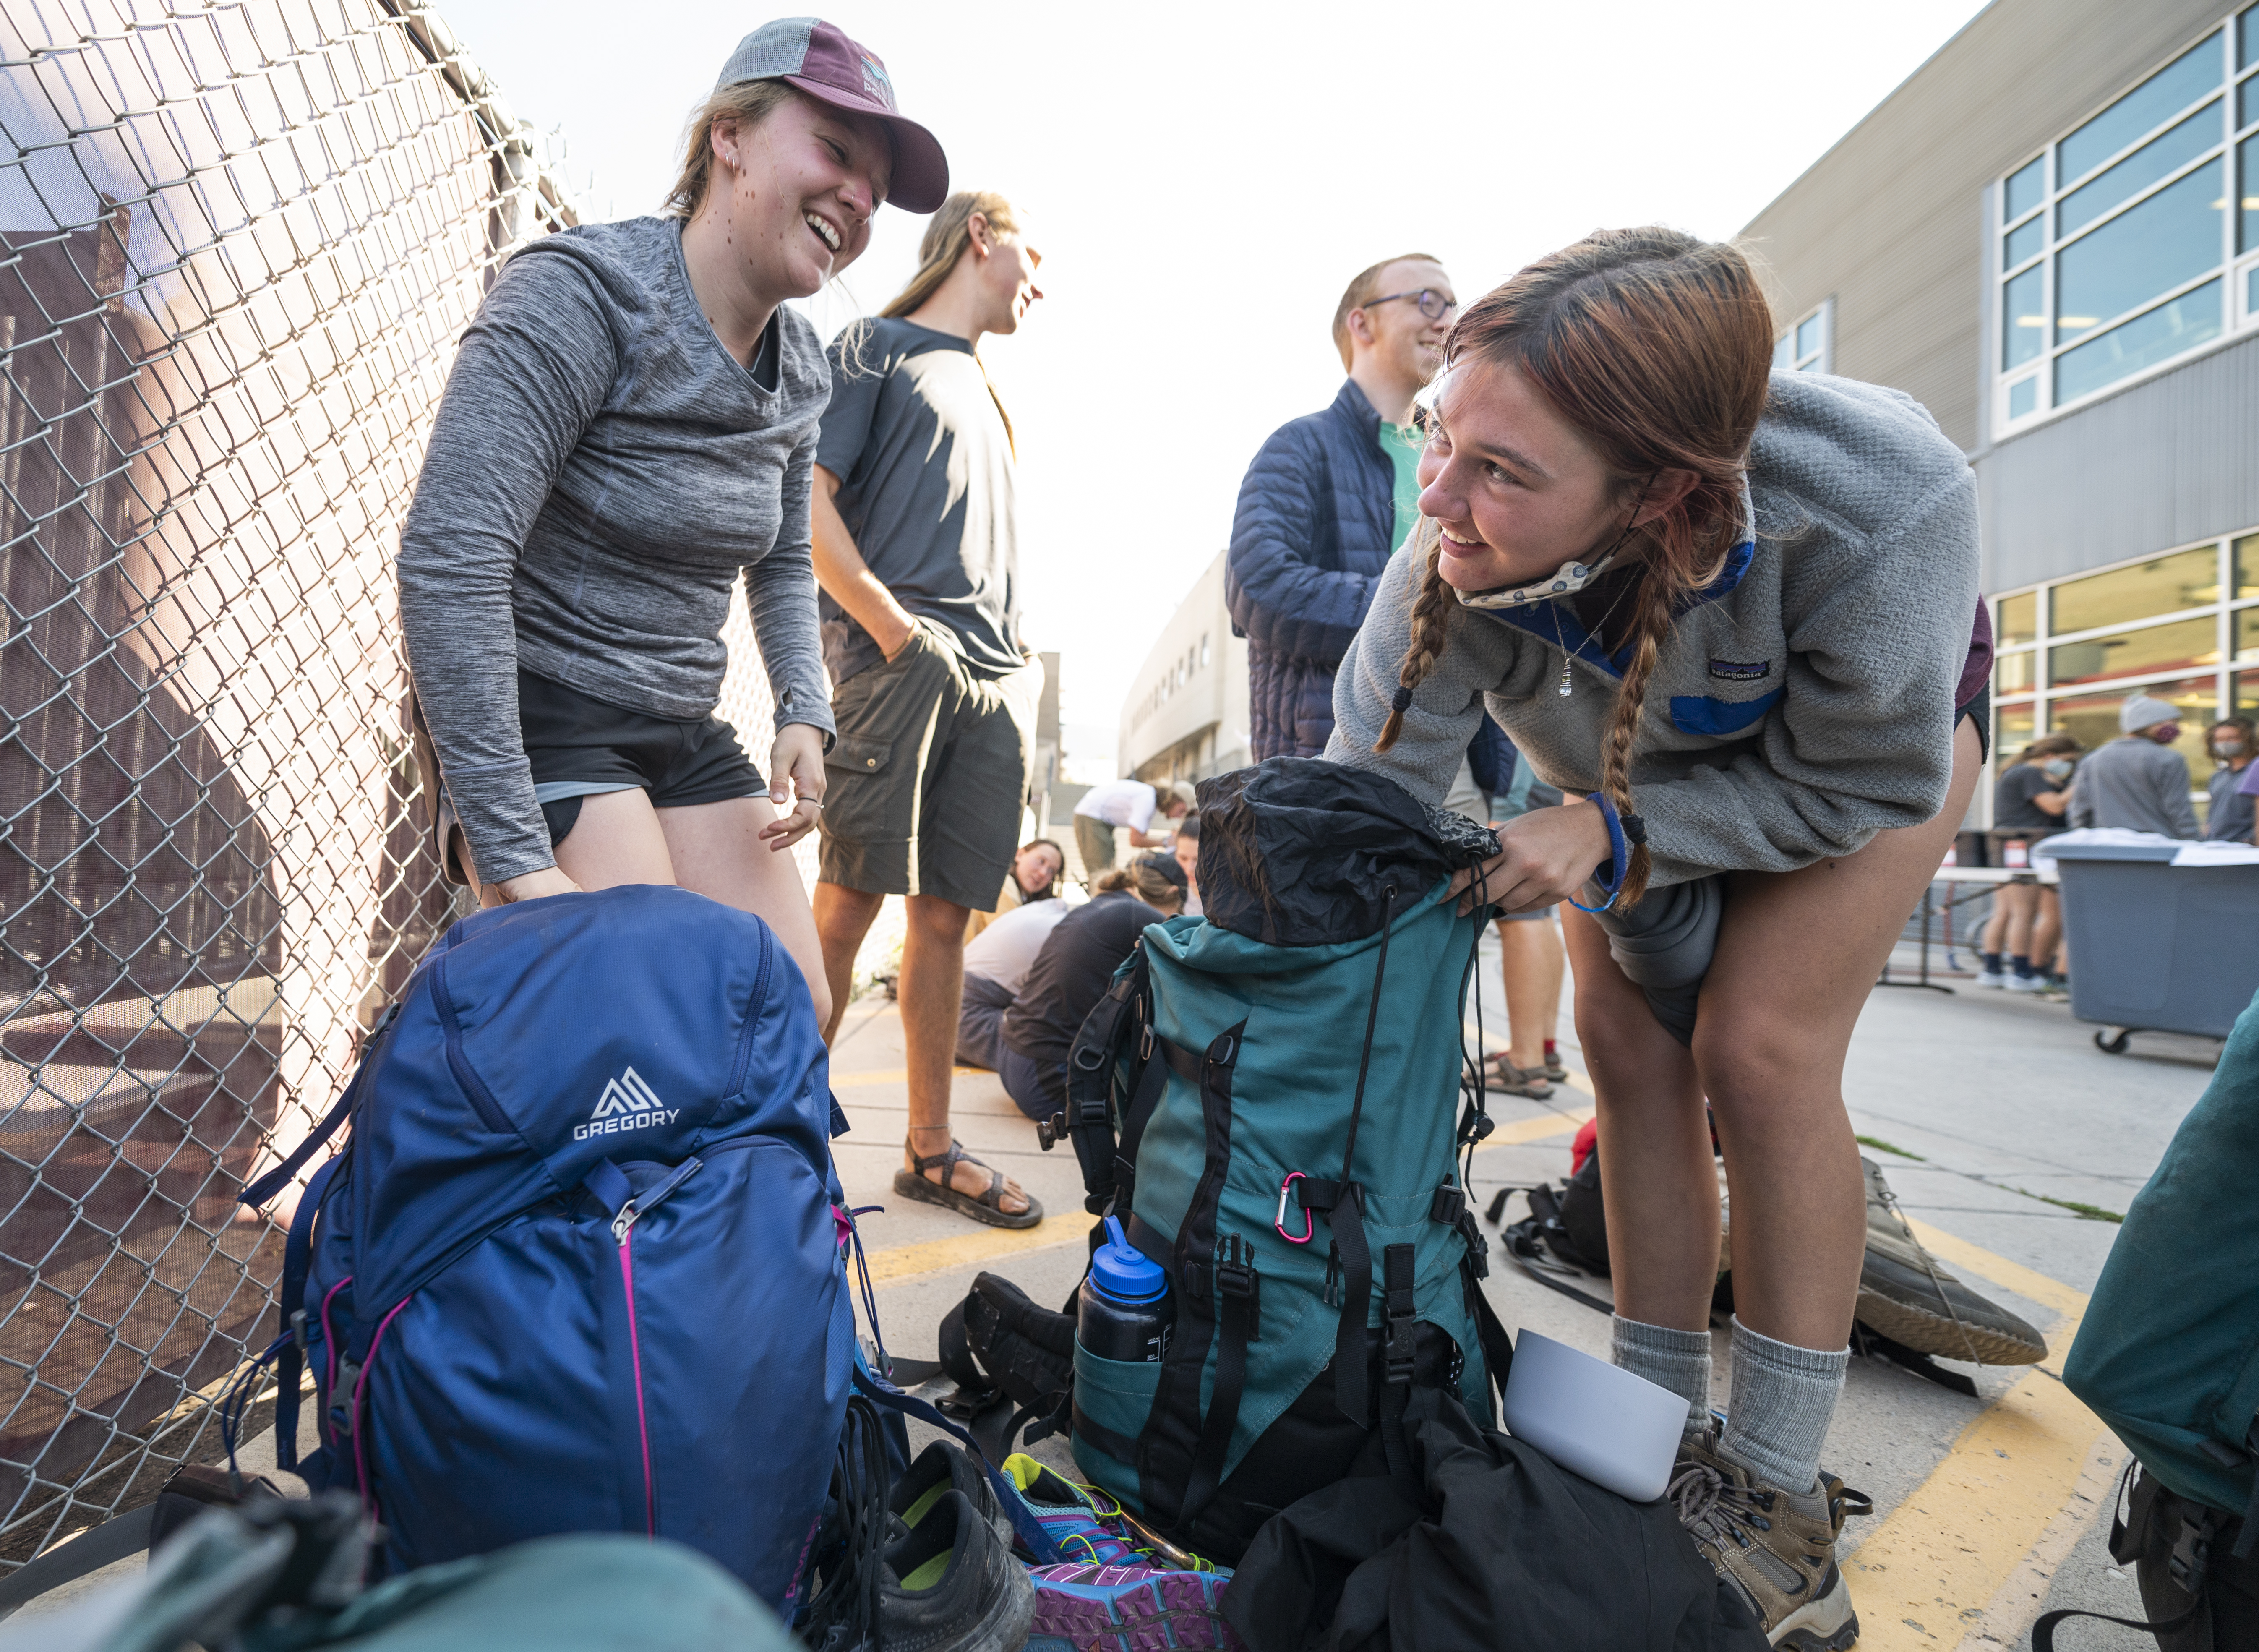 Students return camping gear at UM's campus recreation 